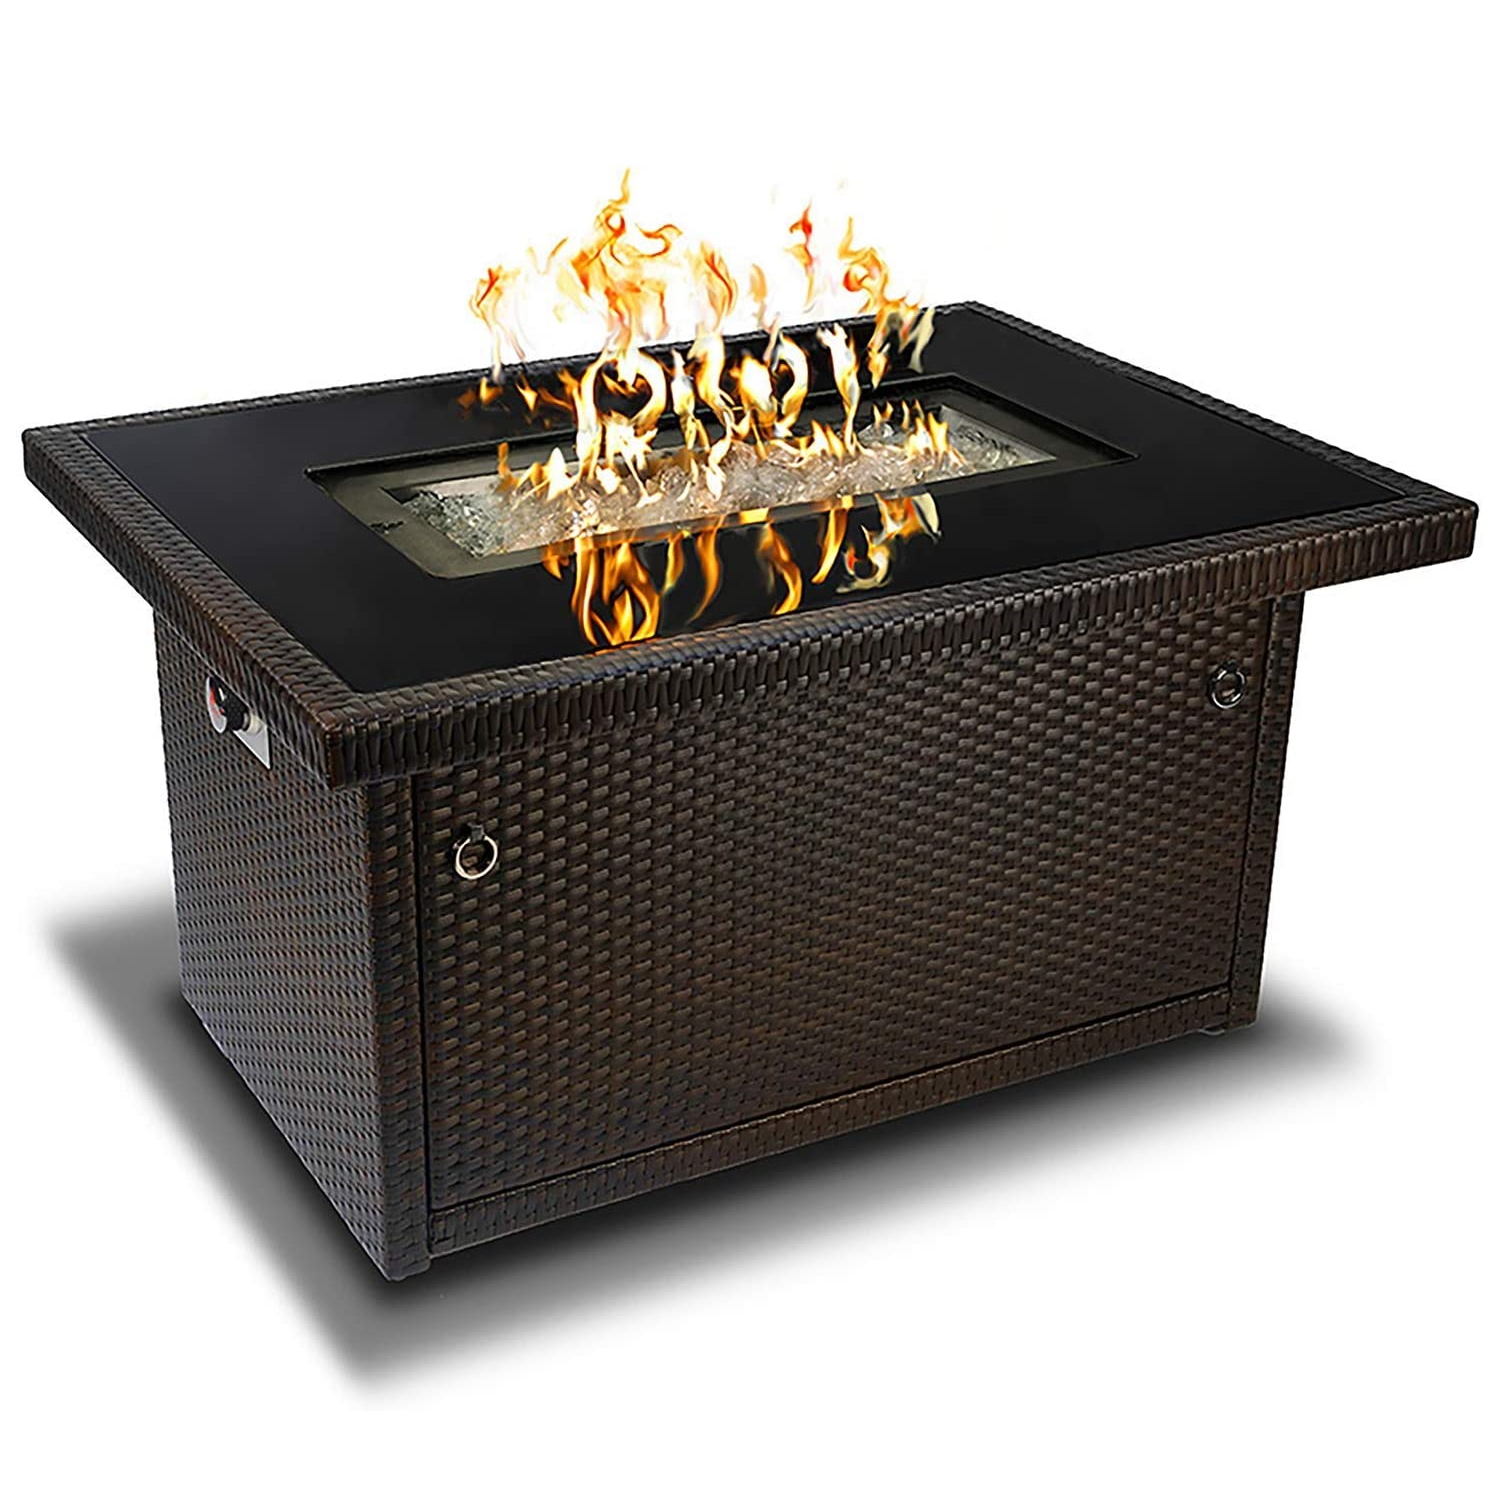 Outland Living 401 Series - 44-Inch Outdoor Propane Gas Fire Table